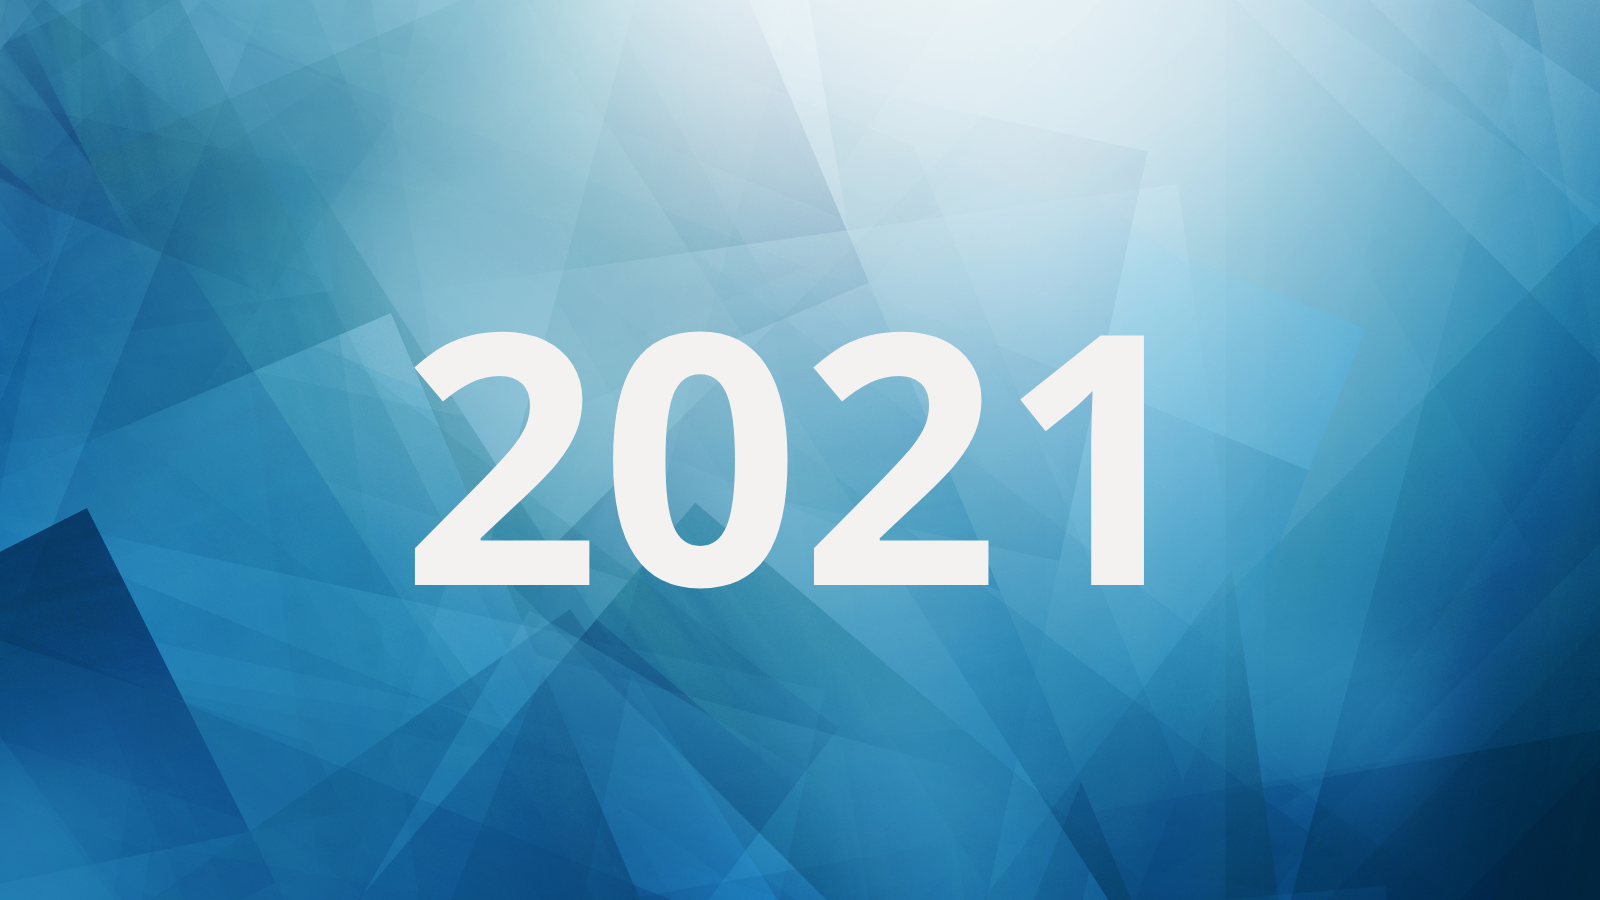 Gradient blue image with "2021" in light grey font